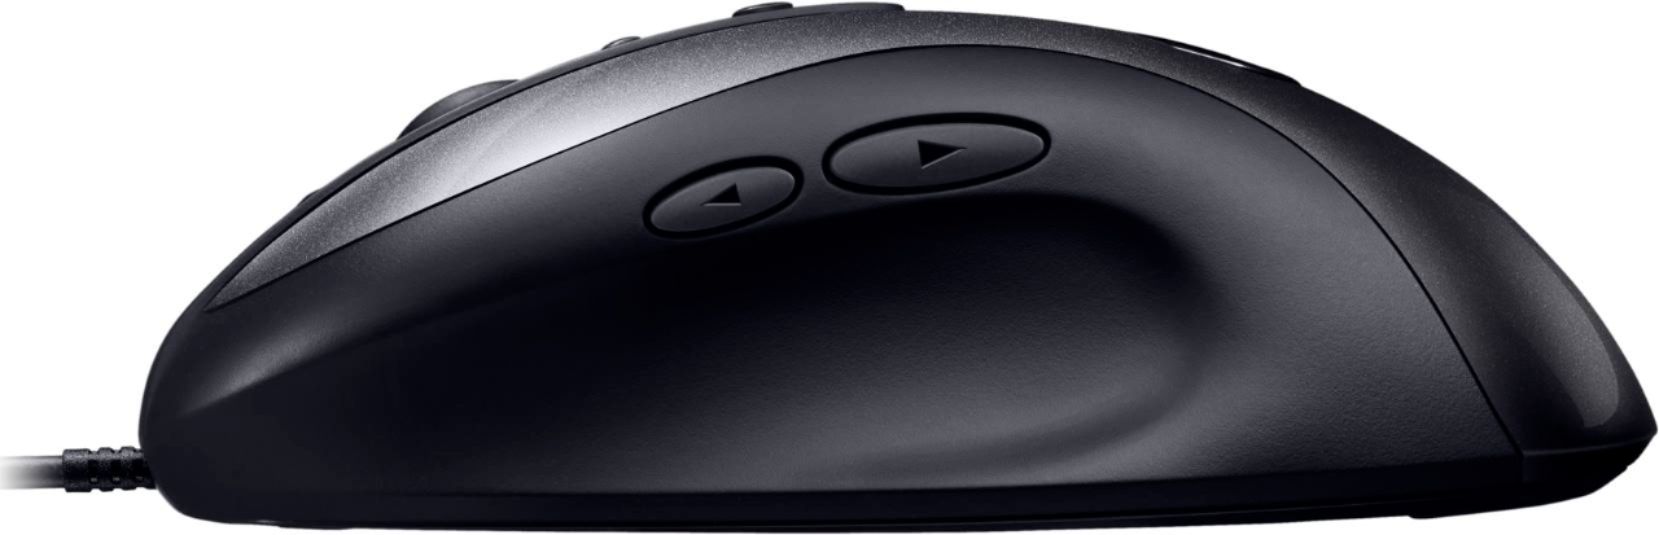 Logitech G MX518 Wired Optical Gaming Mouse Black/Gray 910-005542 - Best Buy